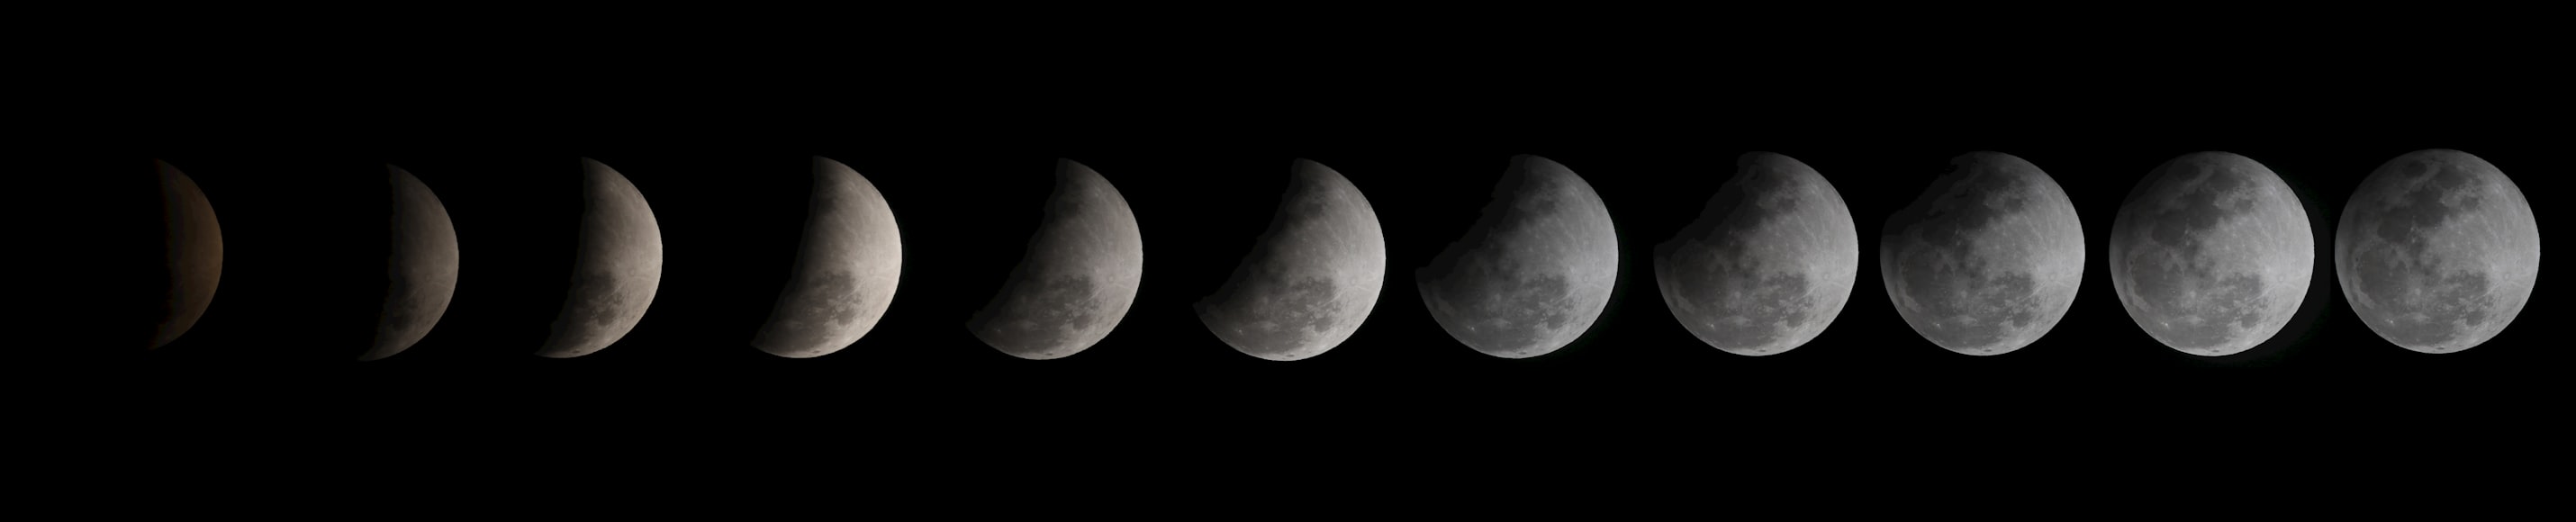 The moon phases